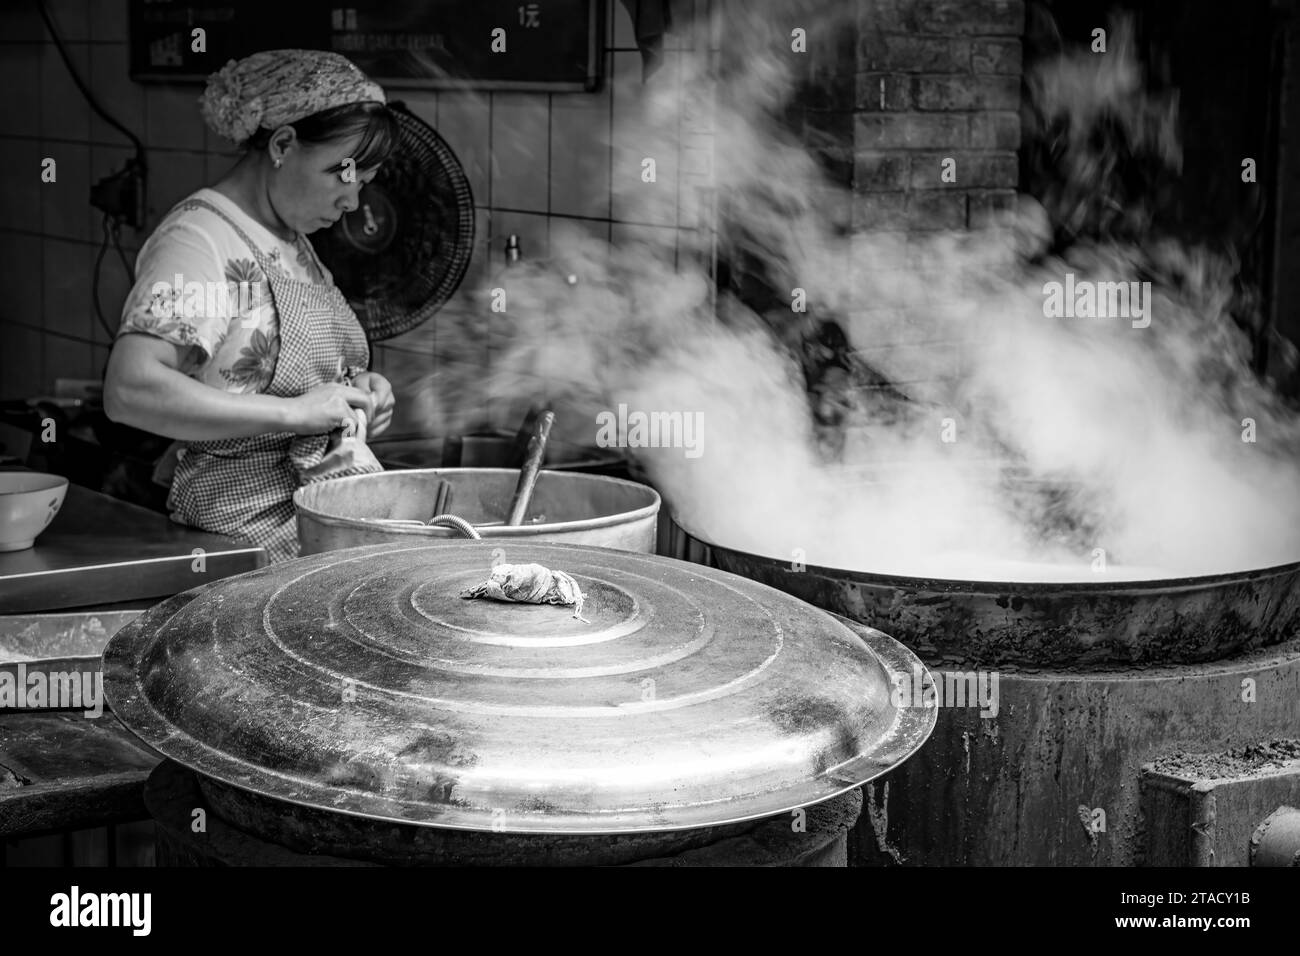 Cooking in big pots in Xian in China, August 14, 2014 Stock Photo